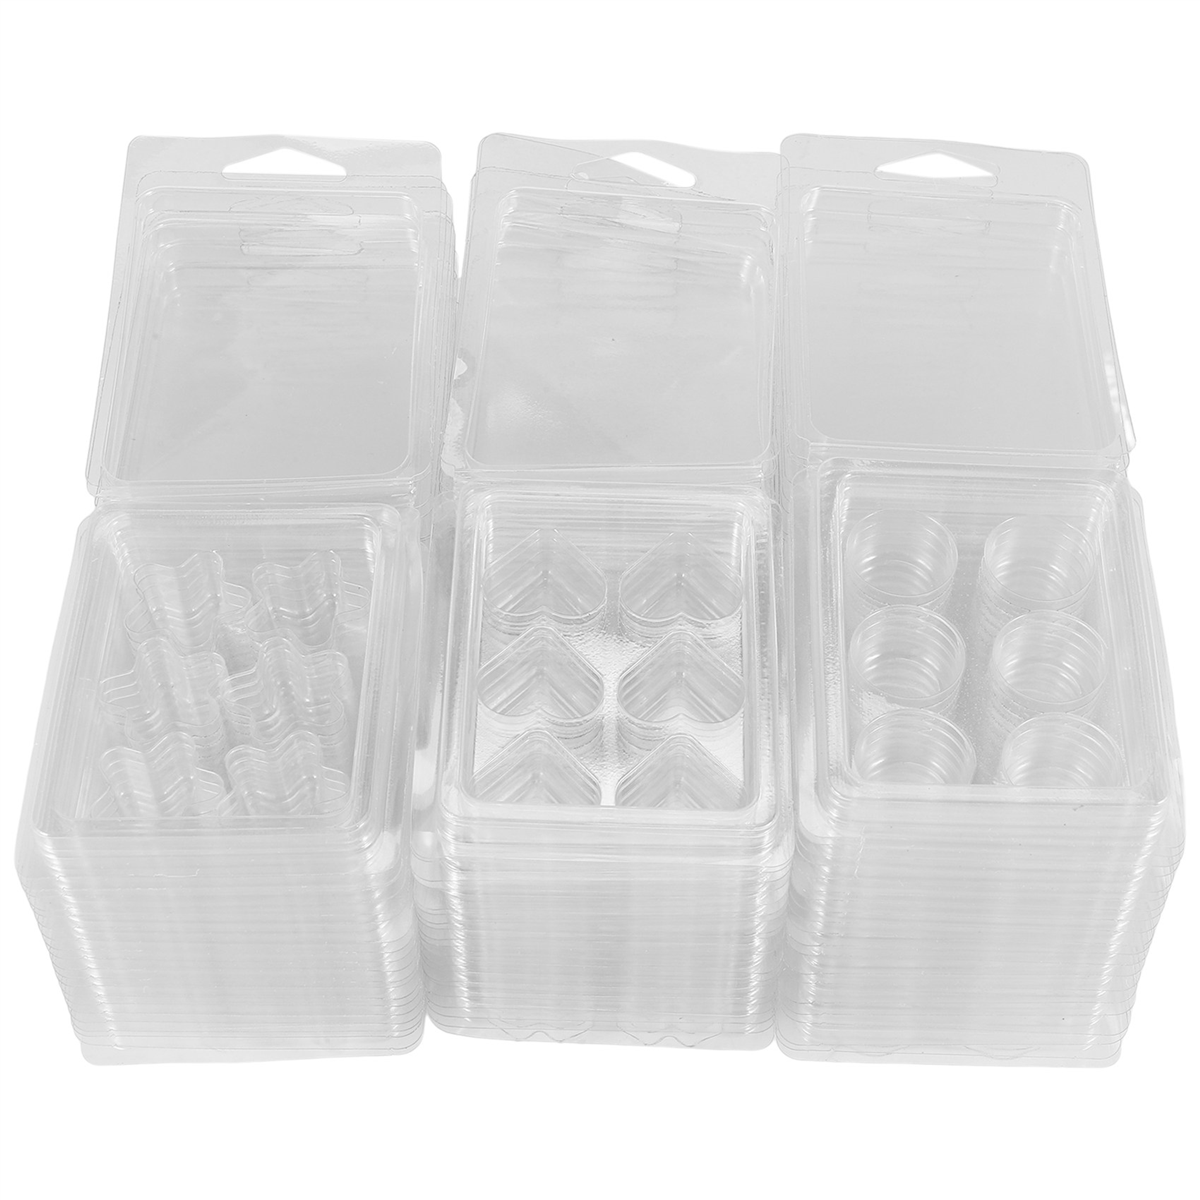 Winyuyby 60 Pack Wax Melt Containers-6 Cavity Clear Empty Plastic Wax Melt  - Clamshells for Tarts Wax Melts. 